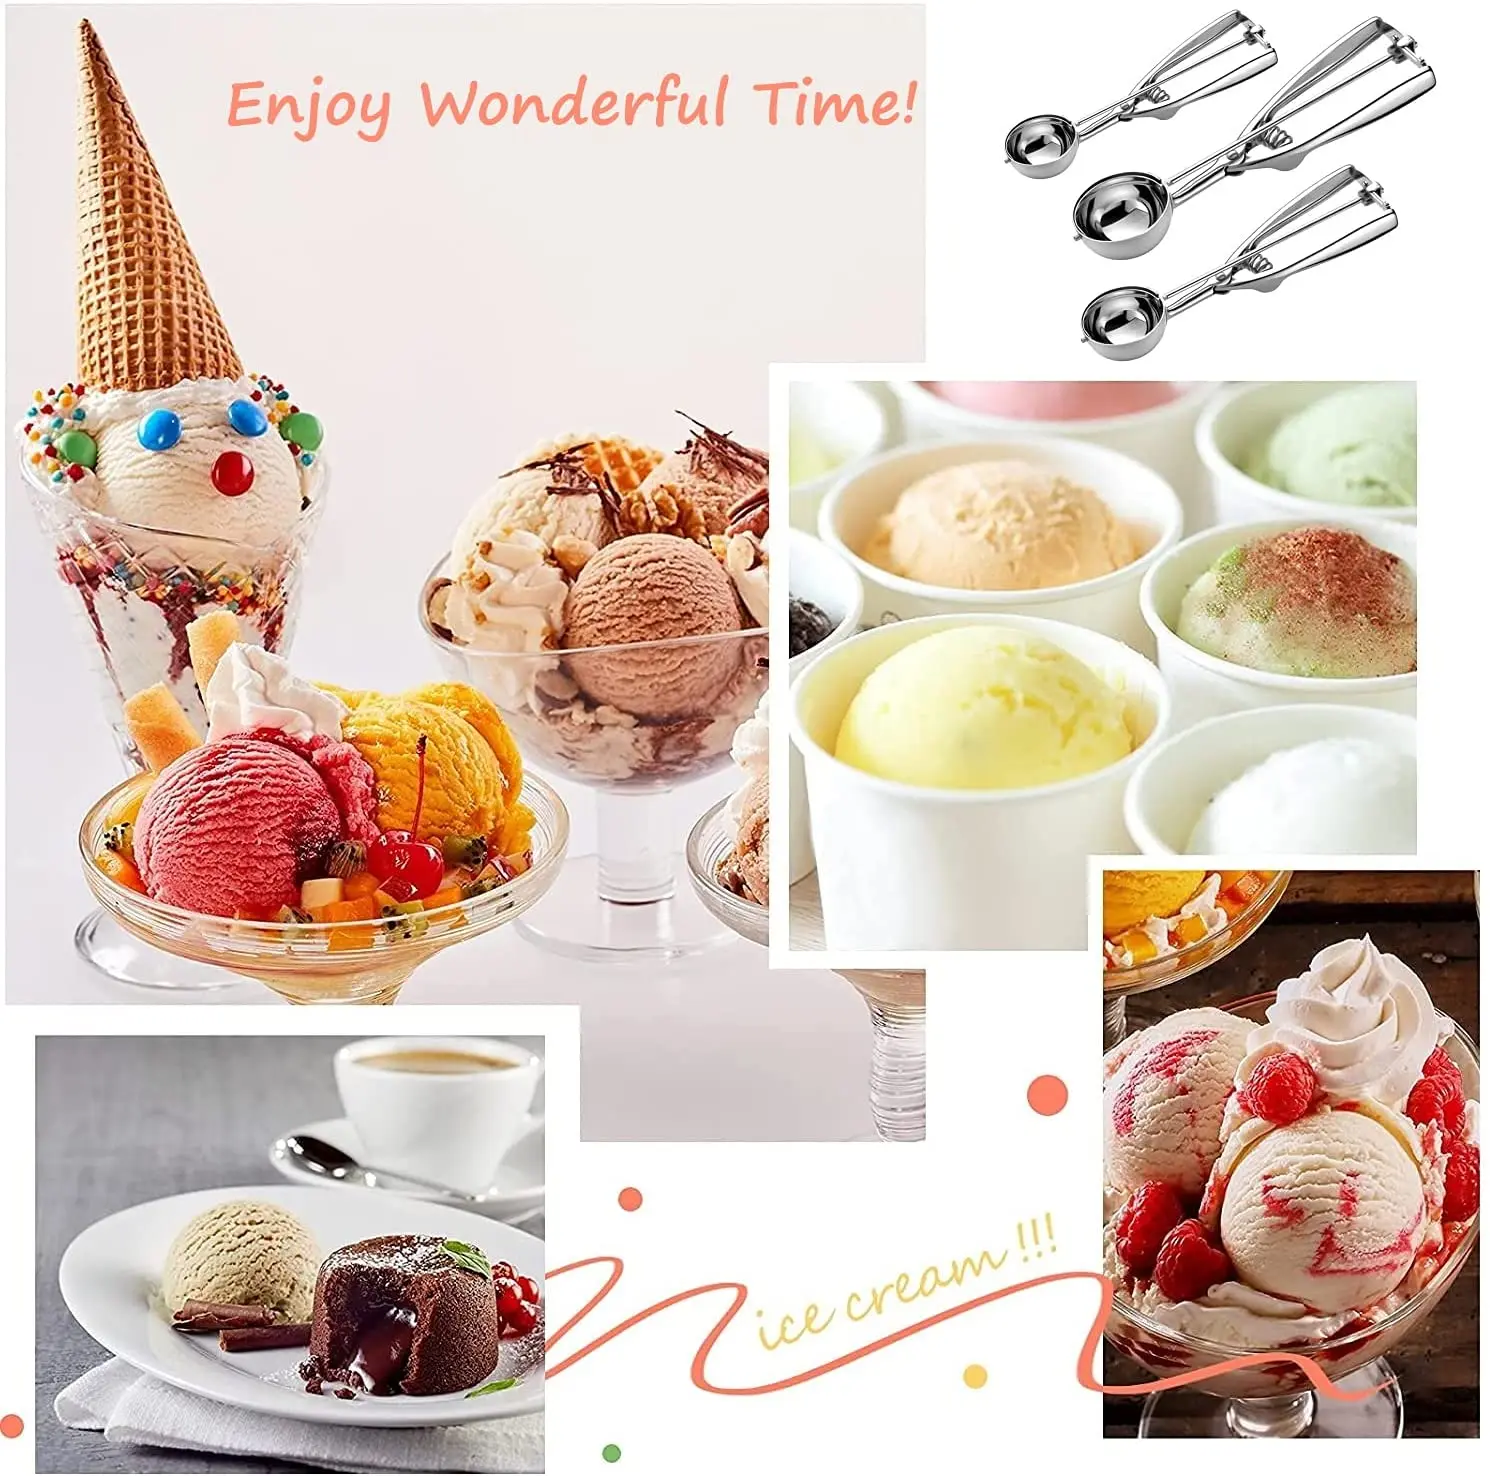 Buy Wholesale China Cookie Scoop Set, Ice Cream Scoops With Trigger,  Stainless Steel Cookie Scoops, Ice Cream Spoon & Ice Cream Scoop at USD 3